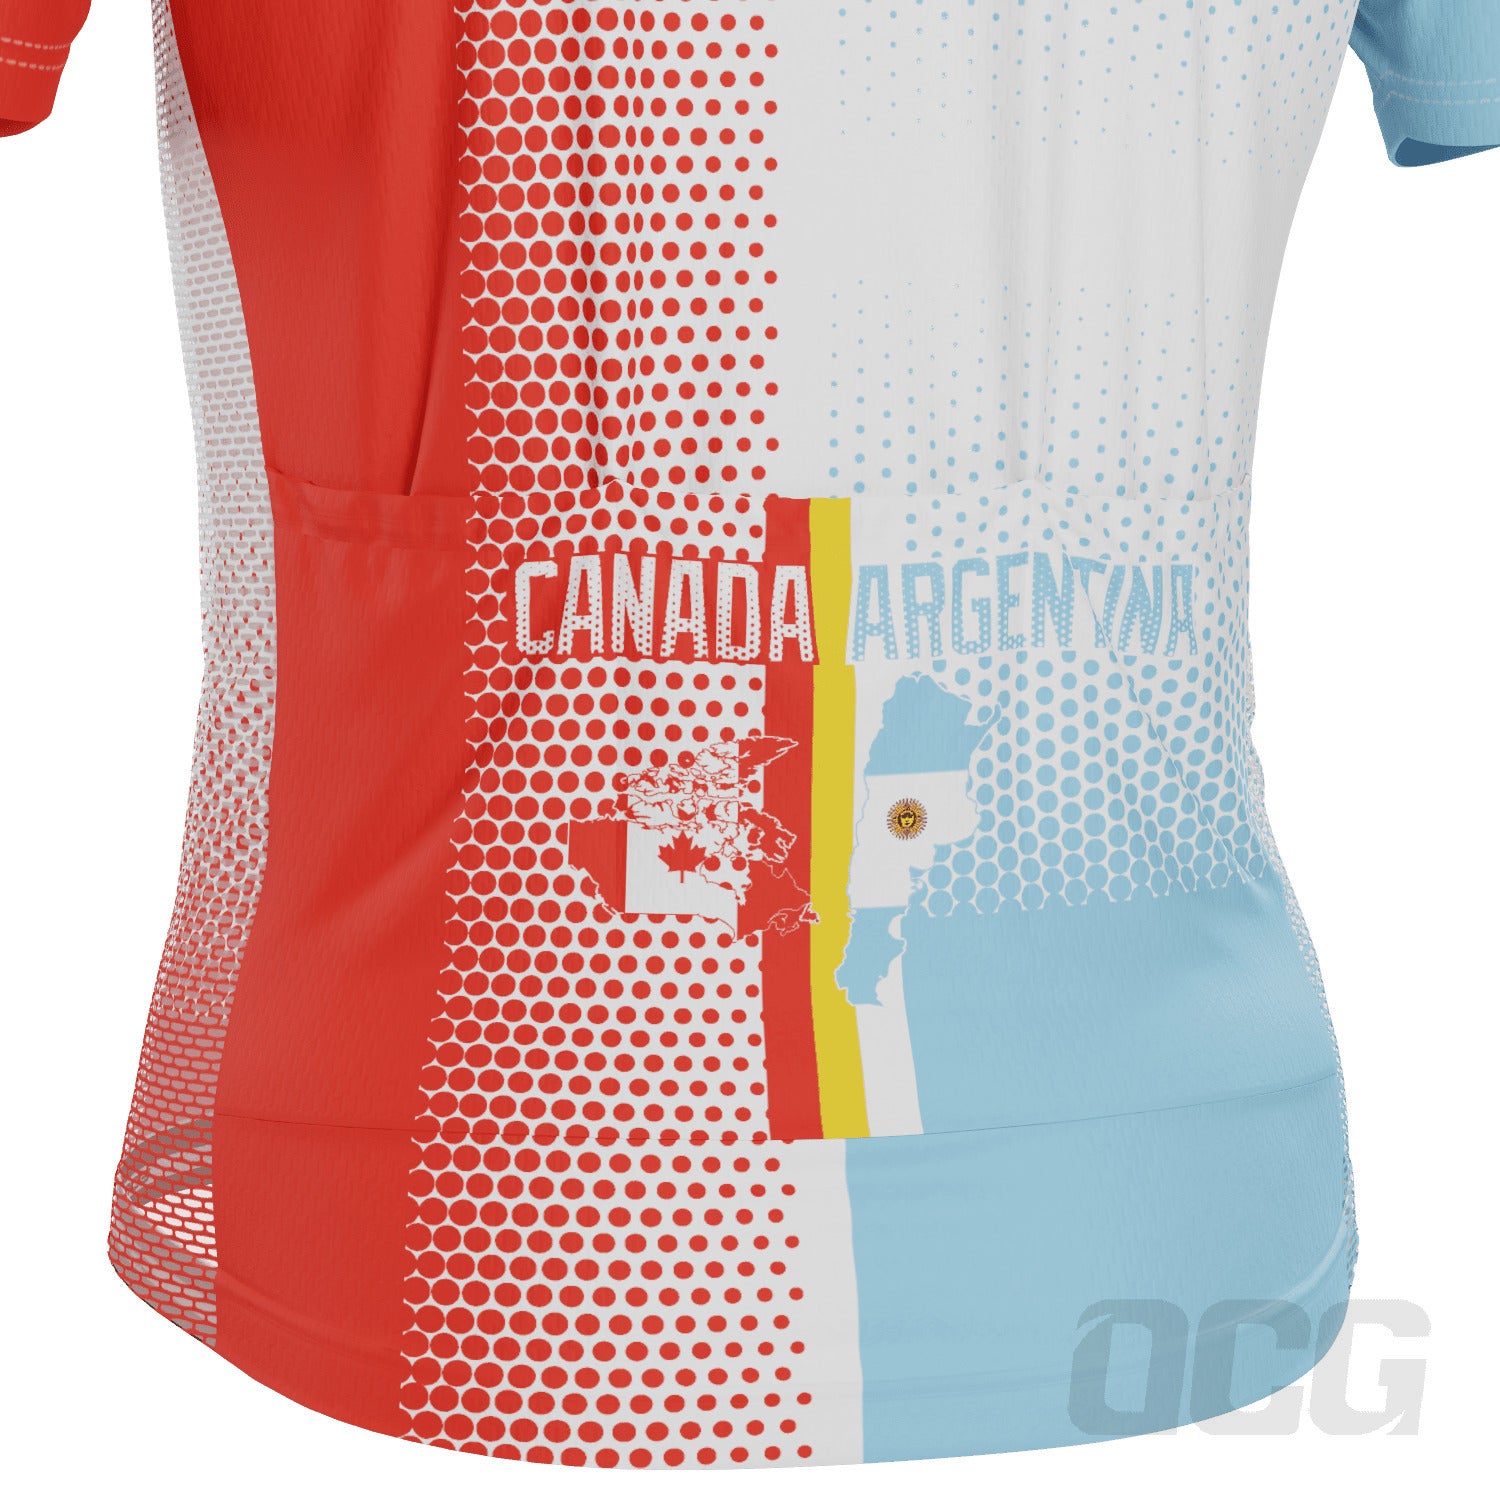 Men's World Countries Team Argentina & Canada Icon Short Sleeve Cycling Jersey